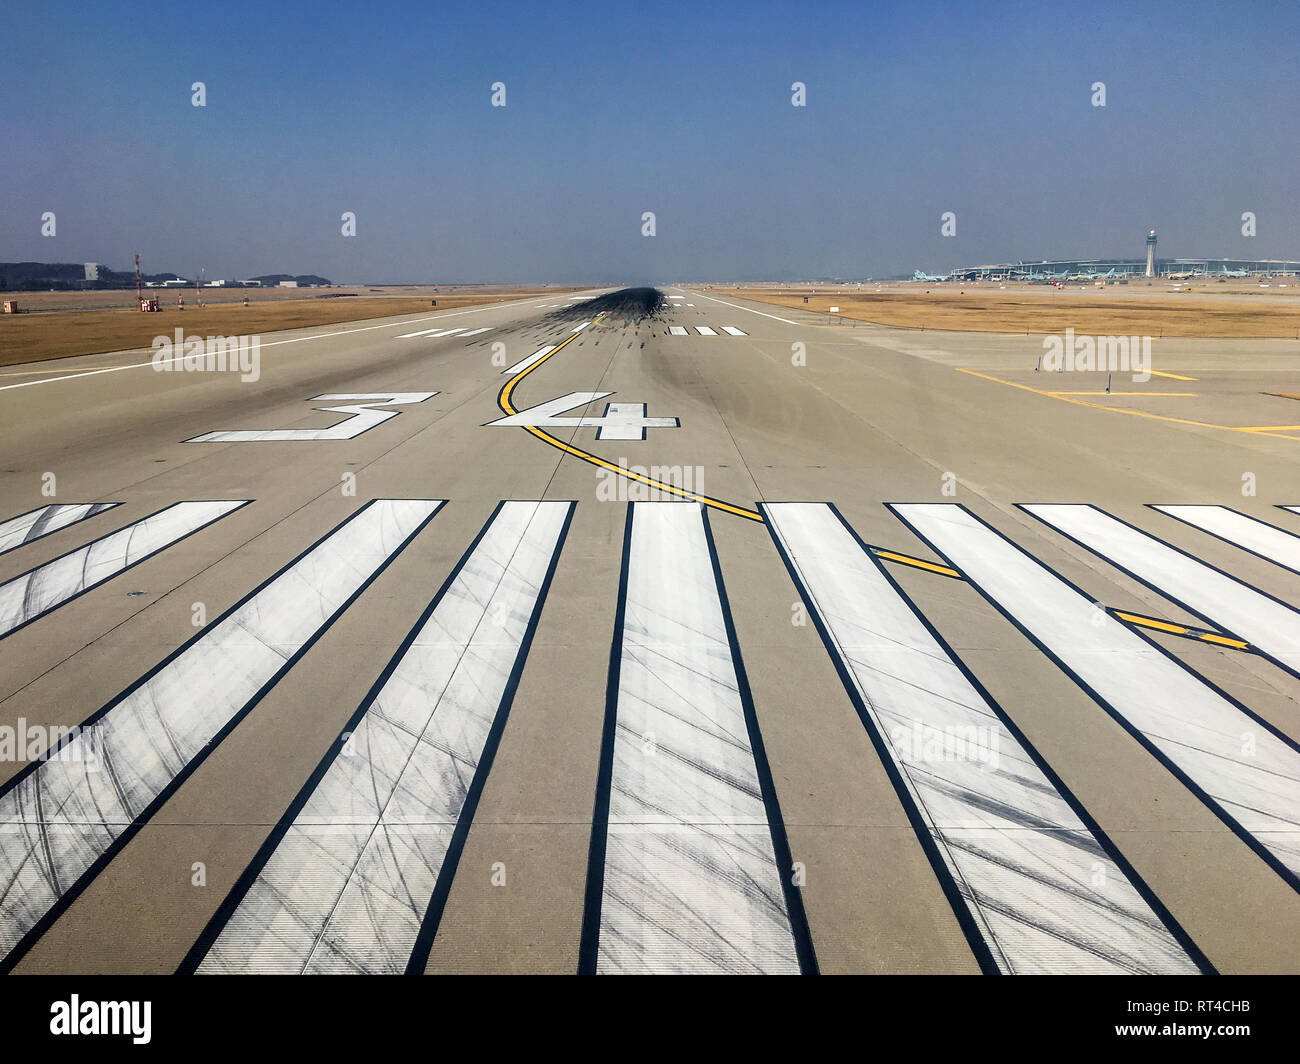 Runway at the Incheon International Airport in Seoul, South Korea. Stock Photo